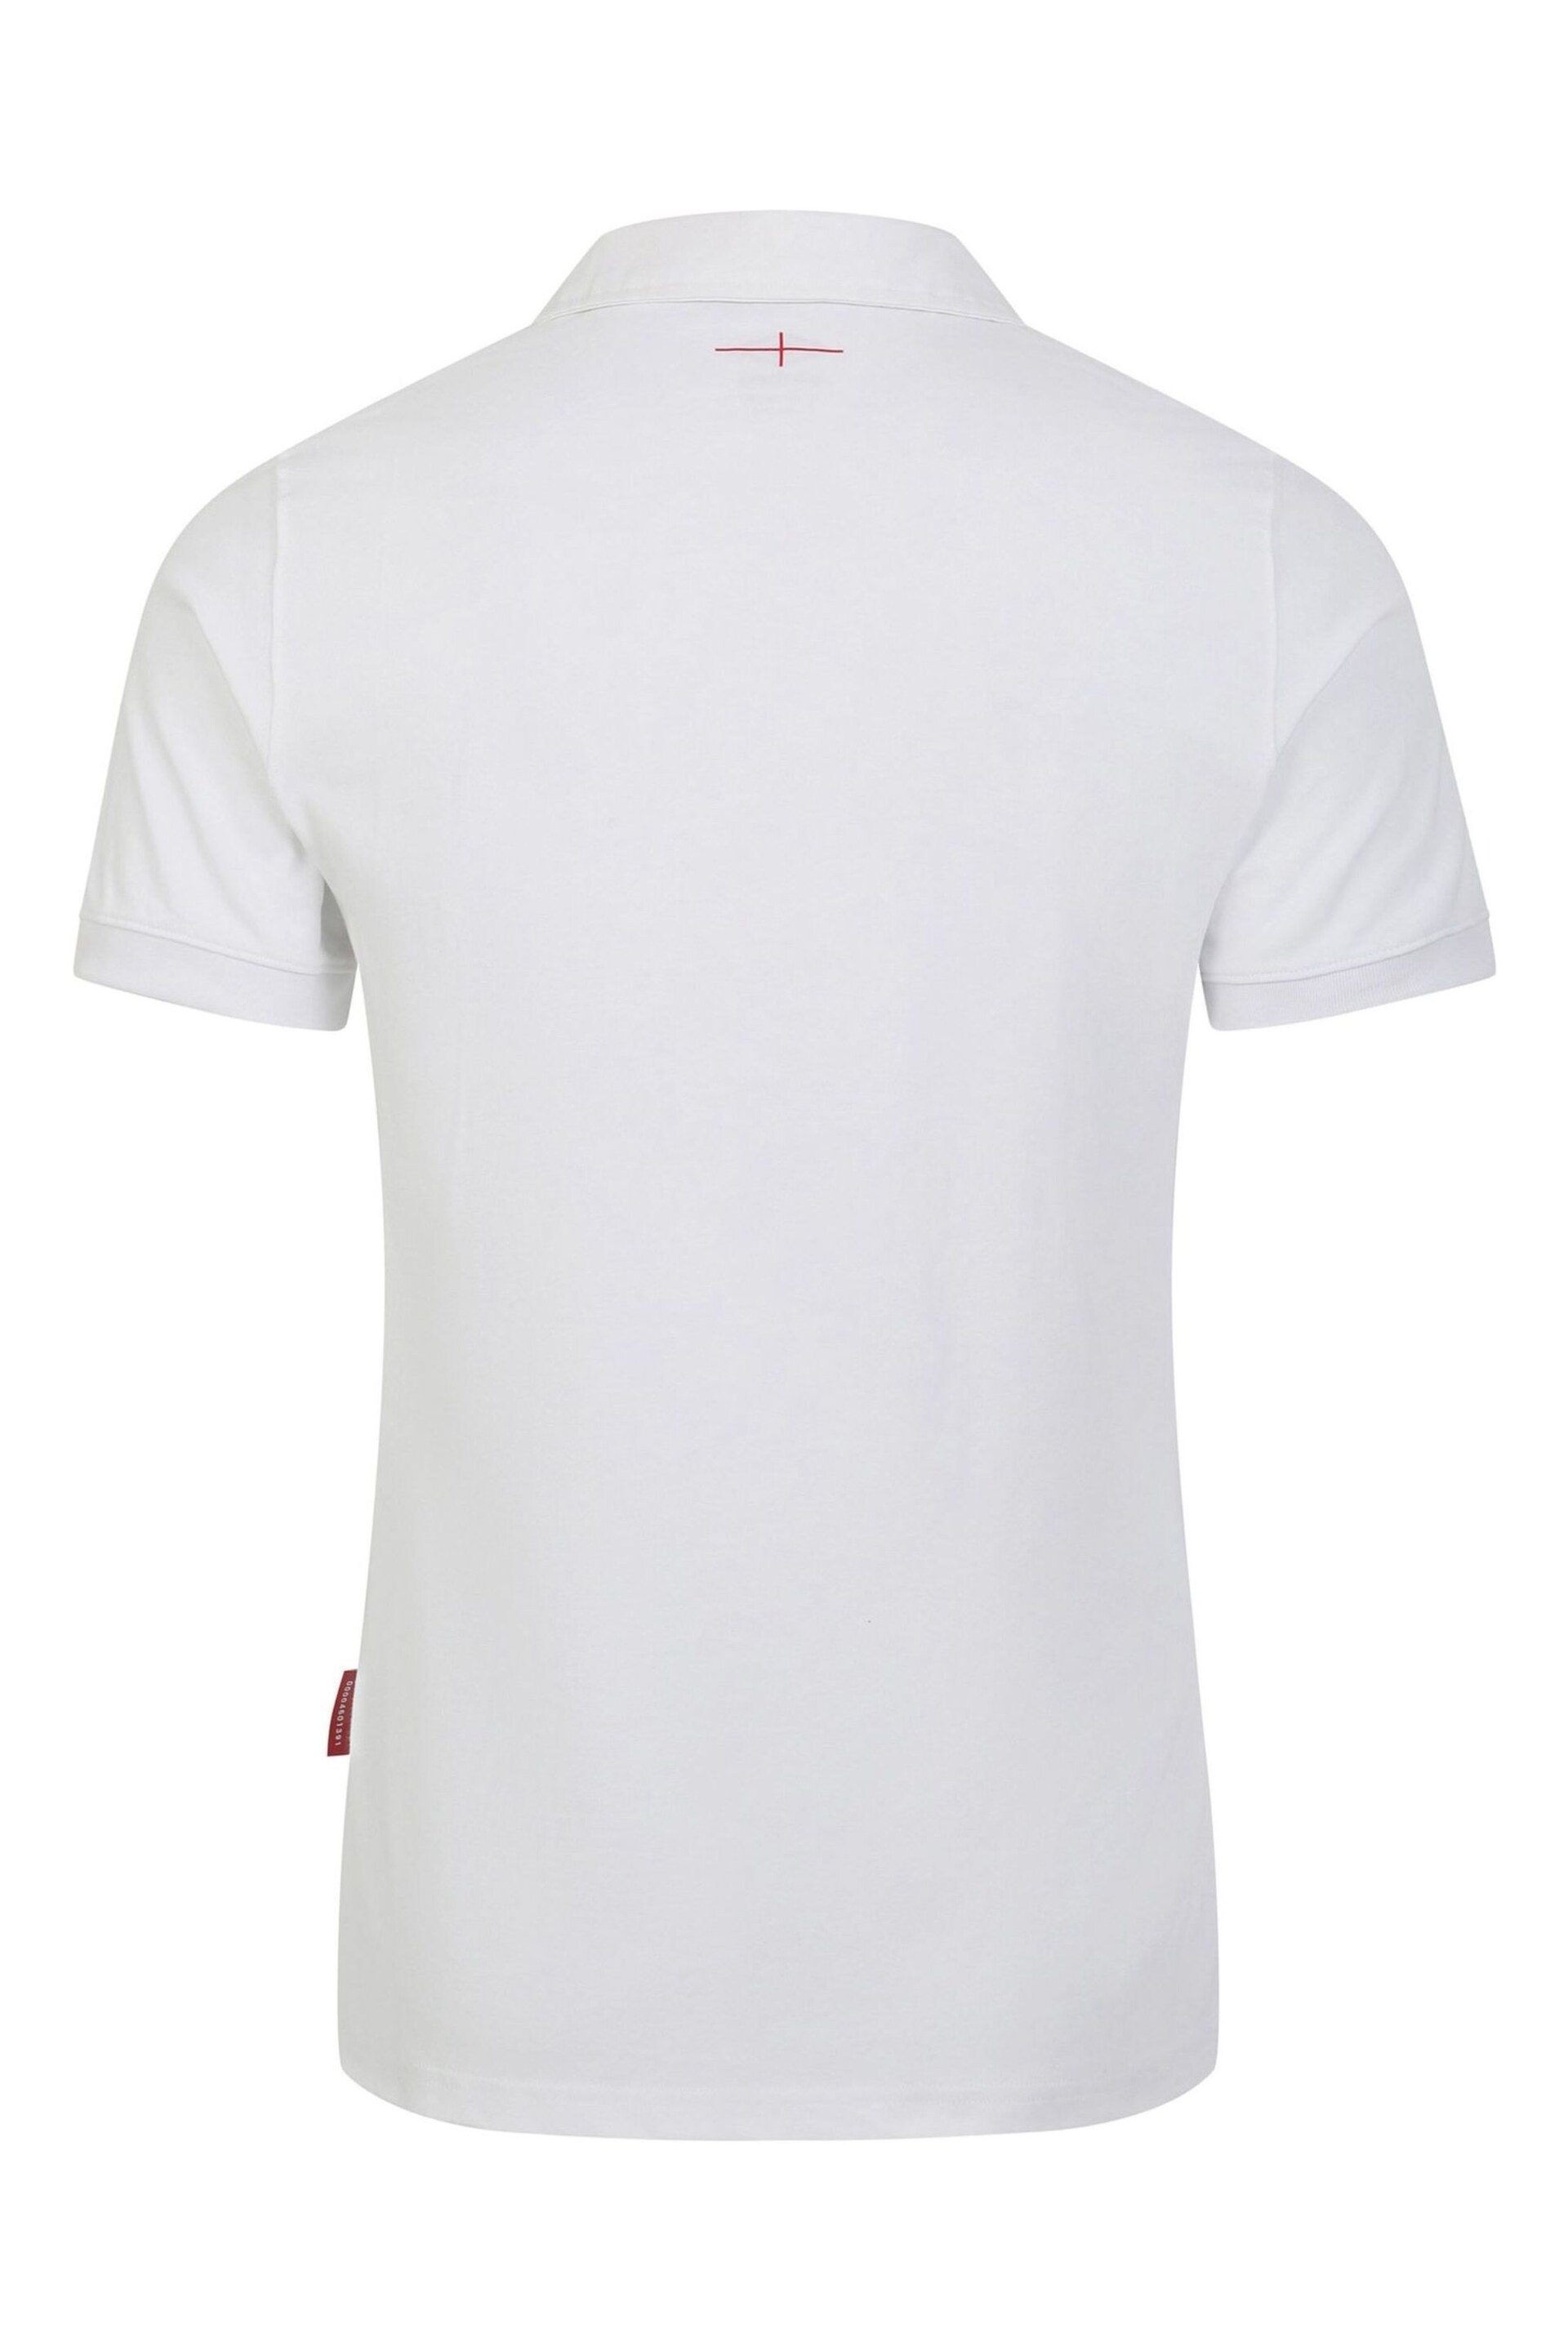 Umbro Cream White England Home Classic Rugby Jersey - Image 2 of 2